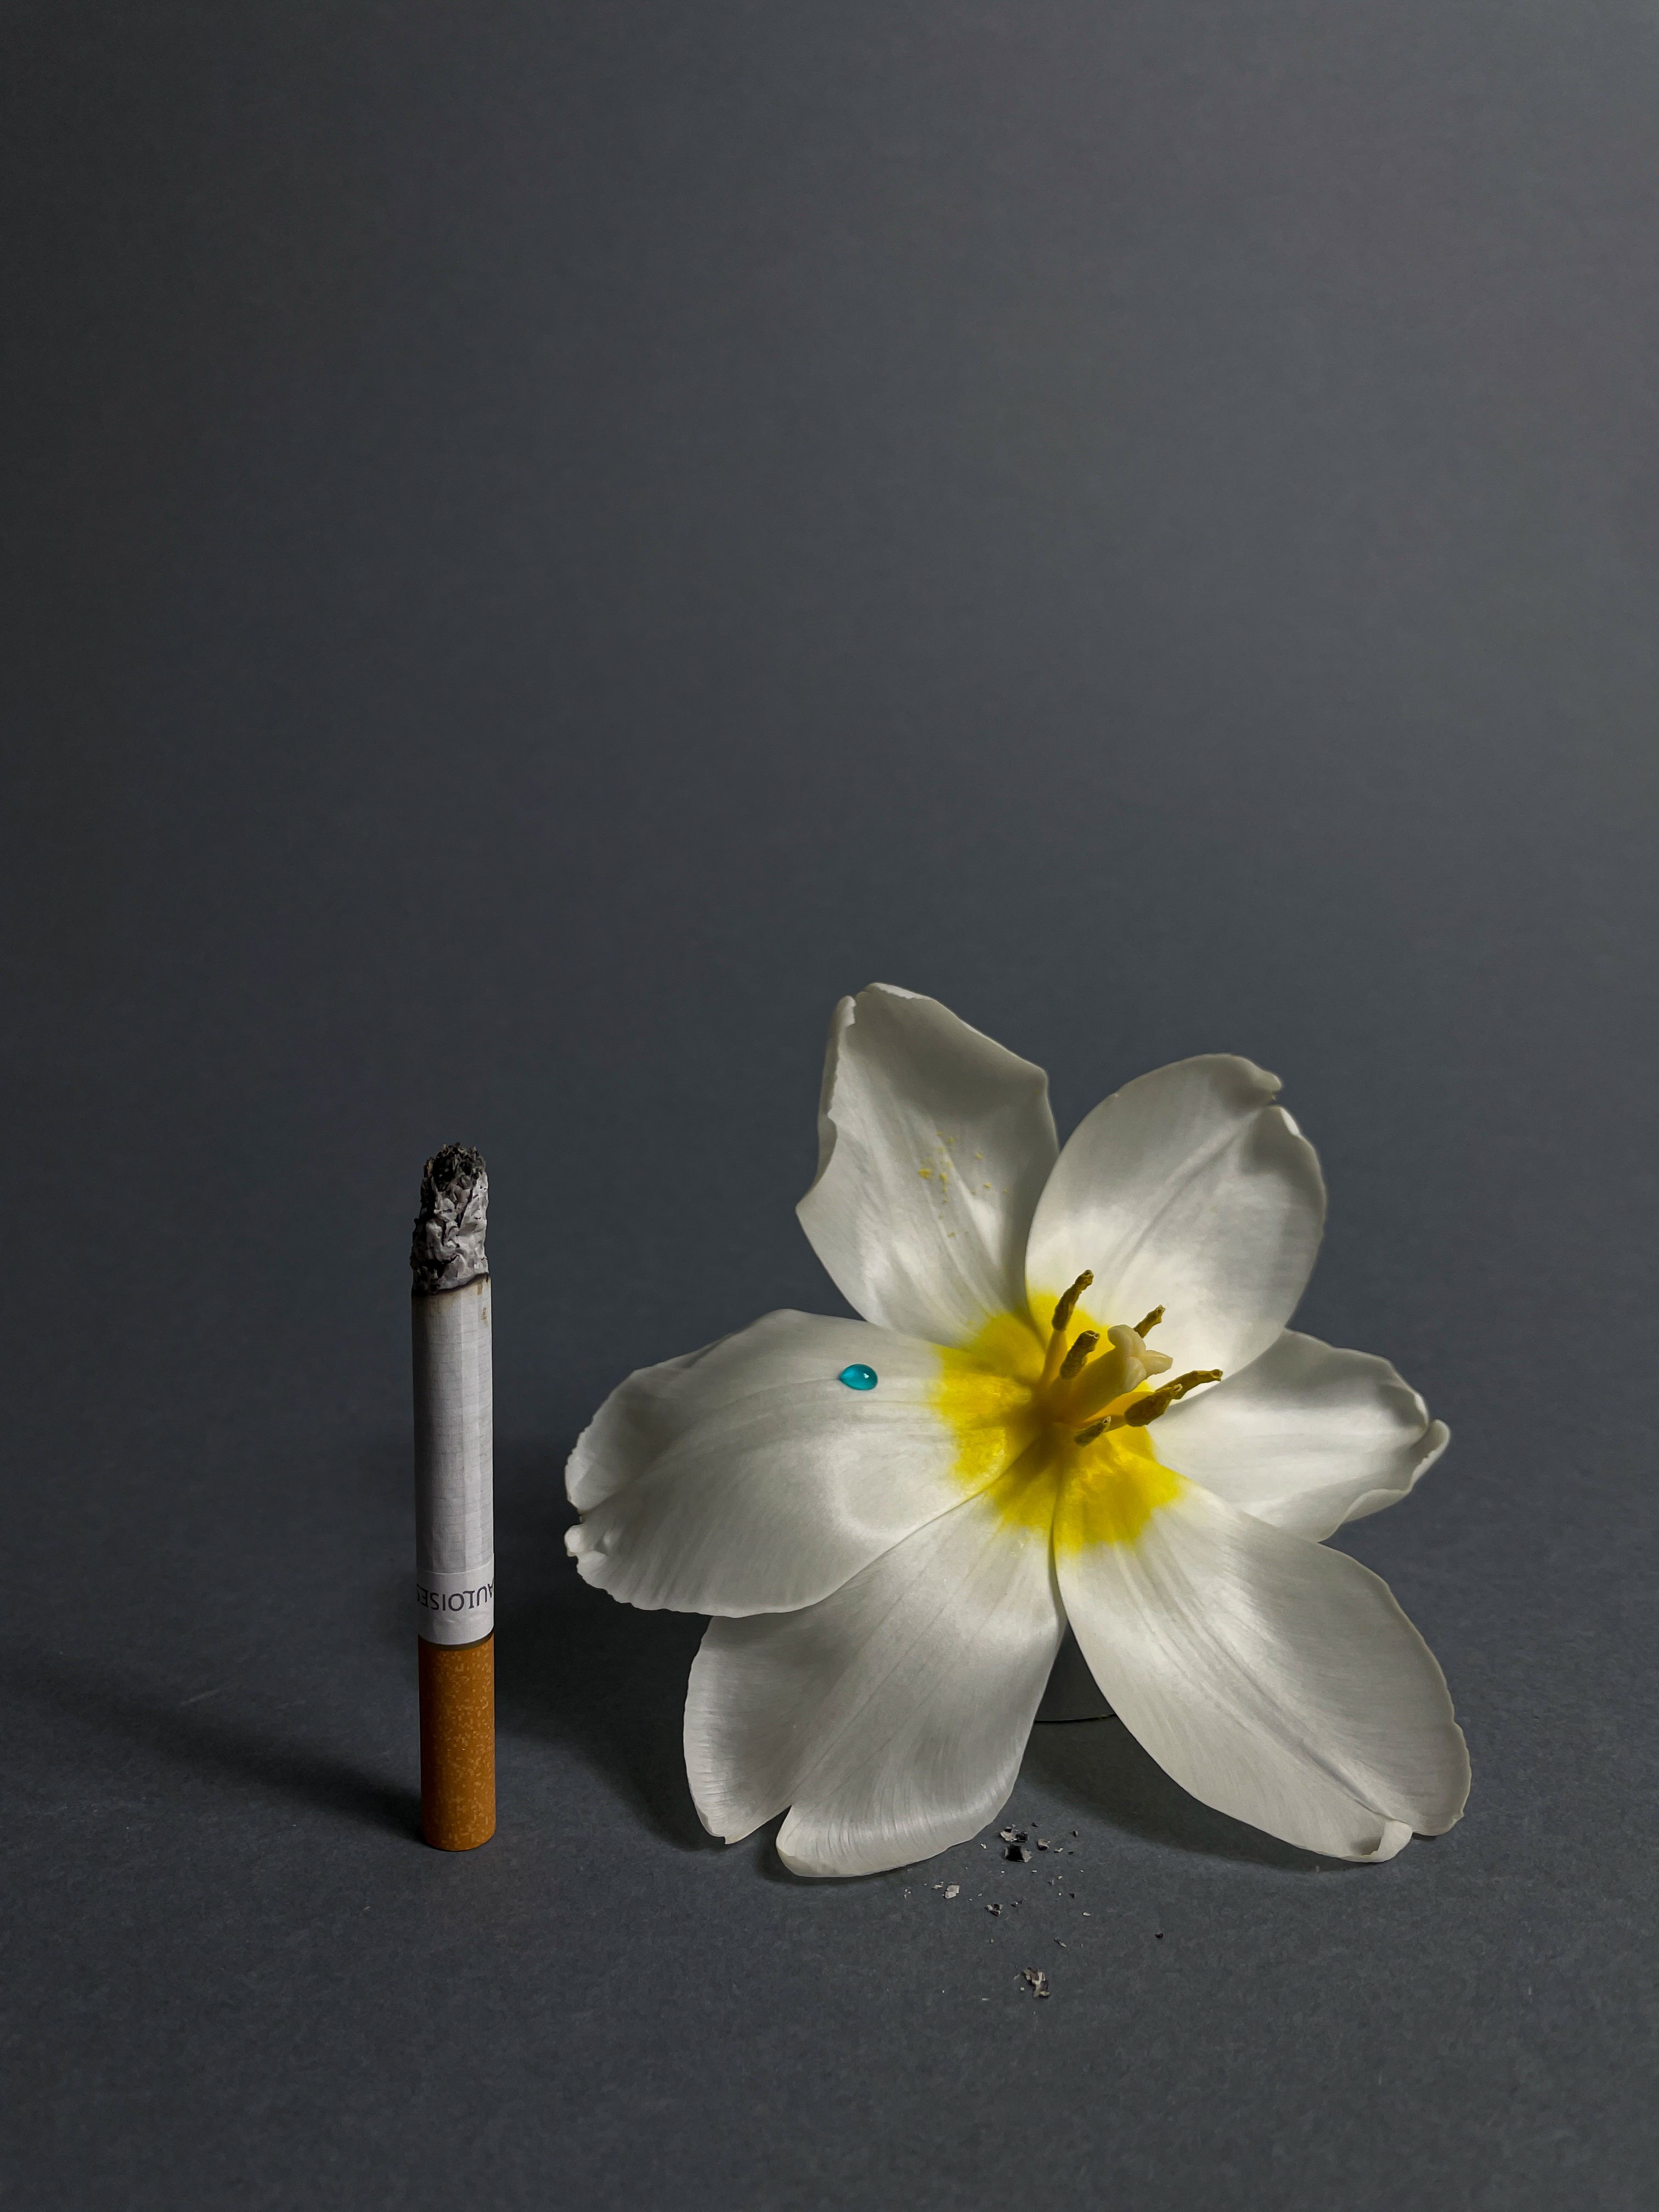 Lily flower with a cigarette